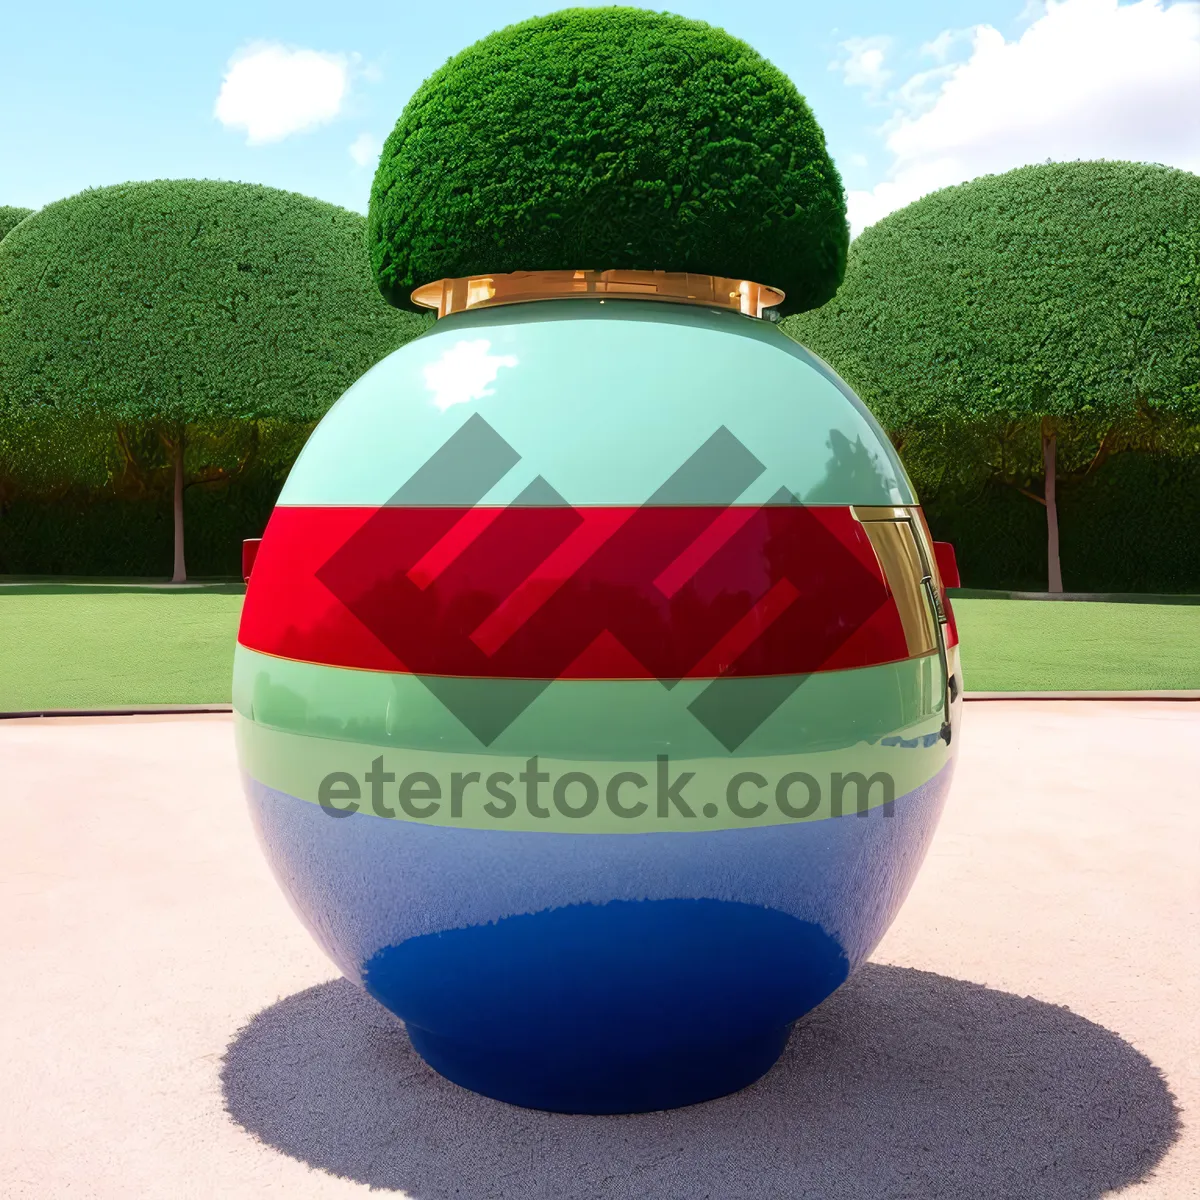 Picture of Croquet Ball - Essential Sports Equipment for a Fun Game